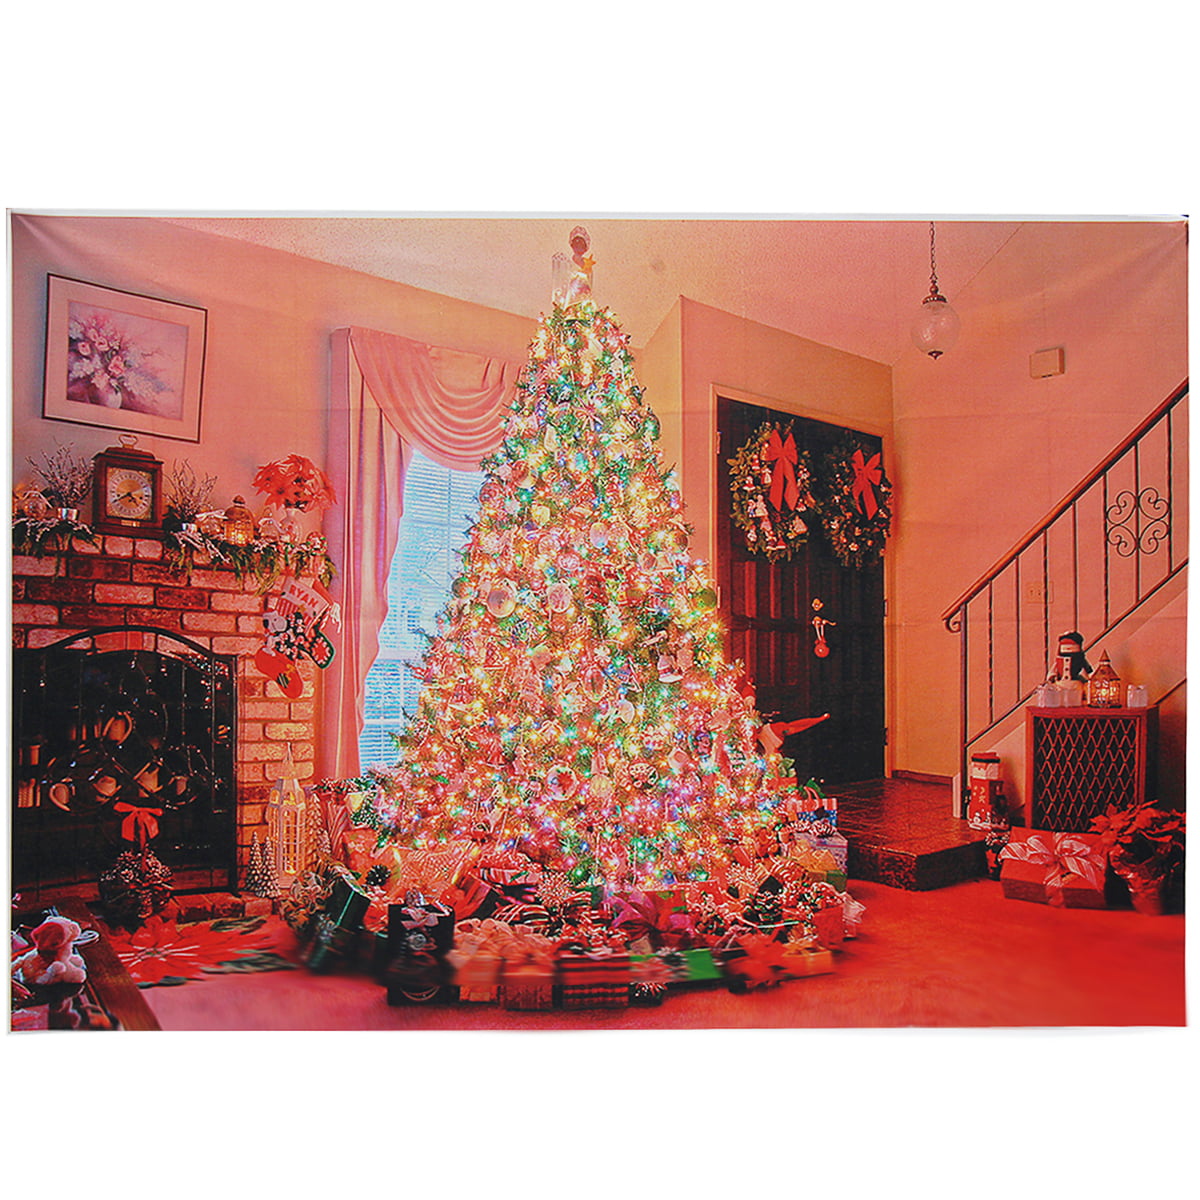 7x5 FT Christmas Theme Pictorial Cloth Photography Background Computer-Printed Backdrop 10-382 